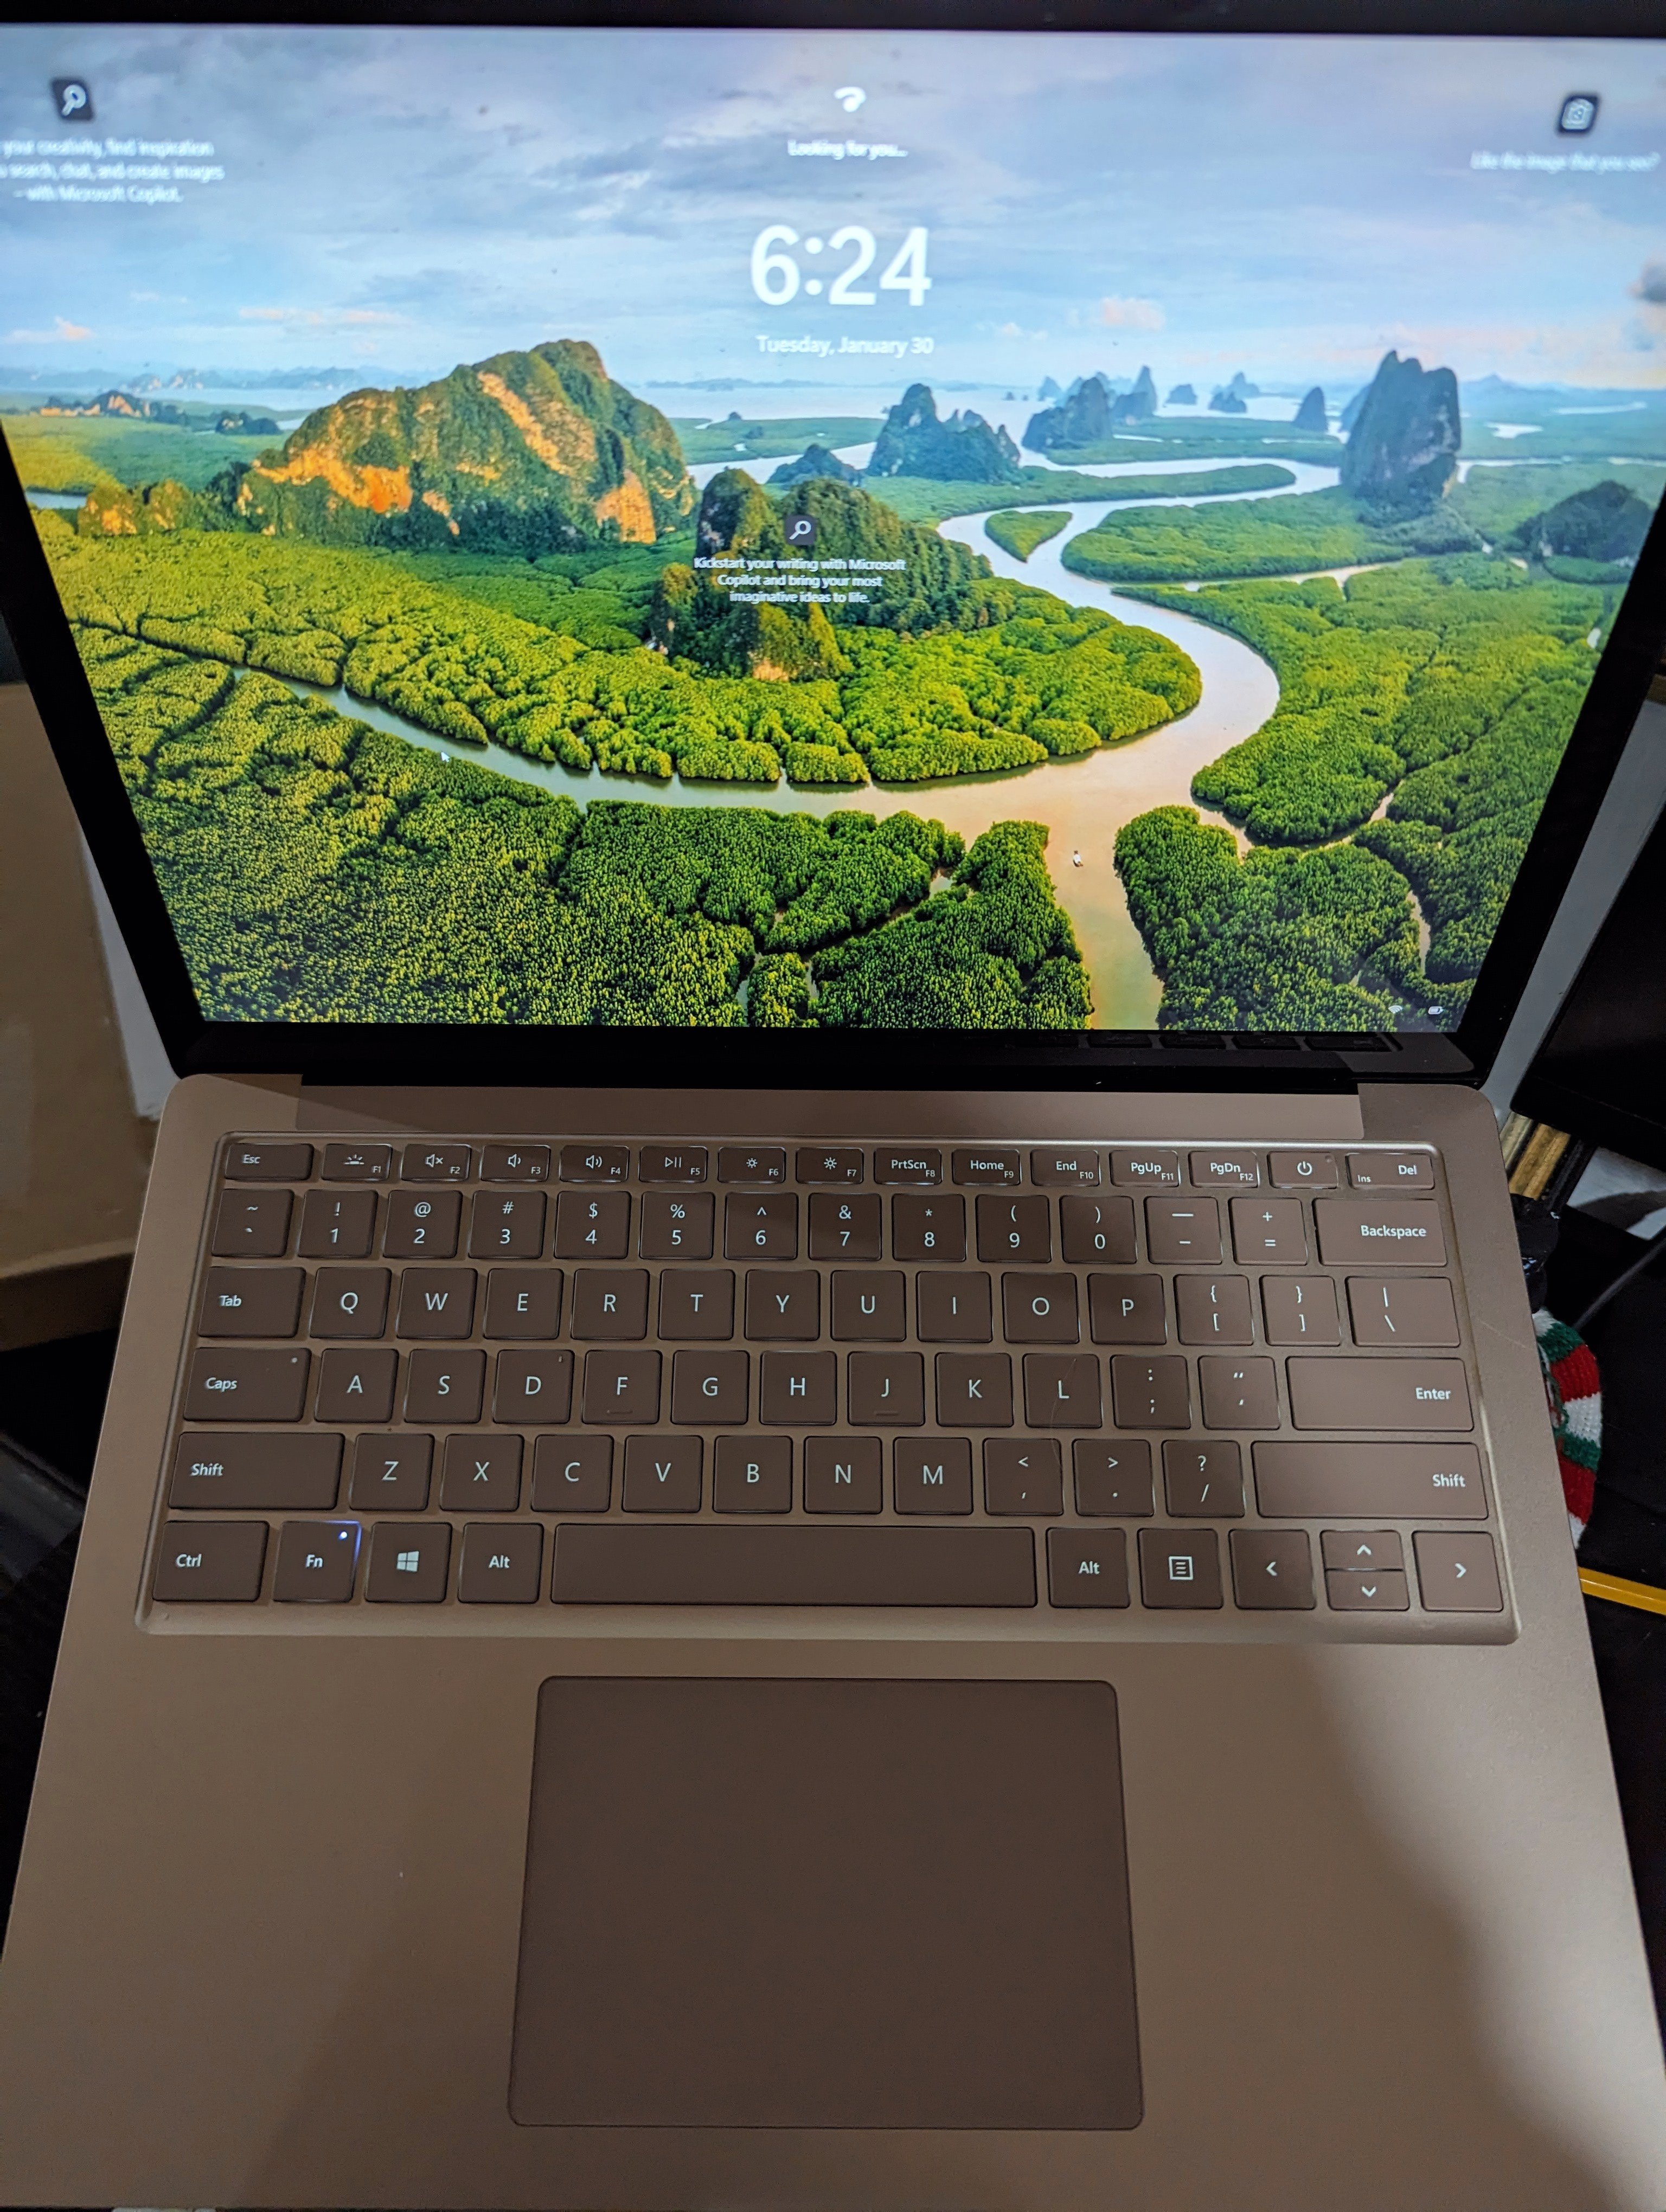 My black surface laptop with it's new Sandstone kb and top.